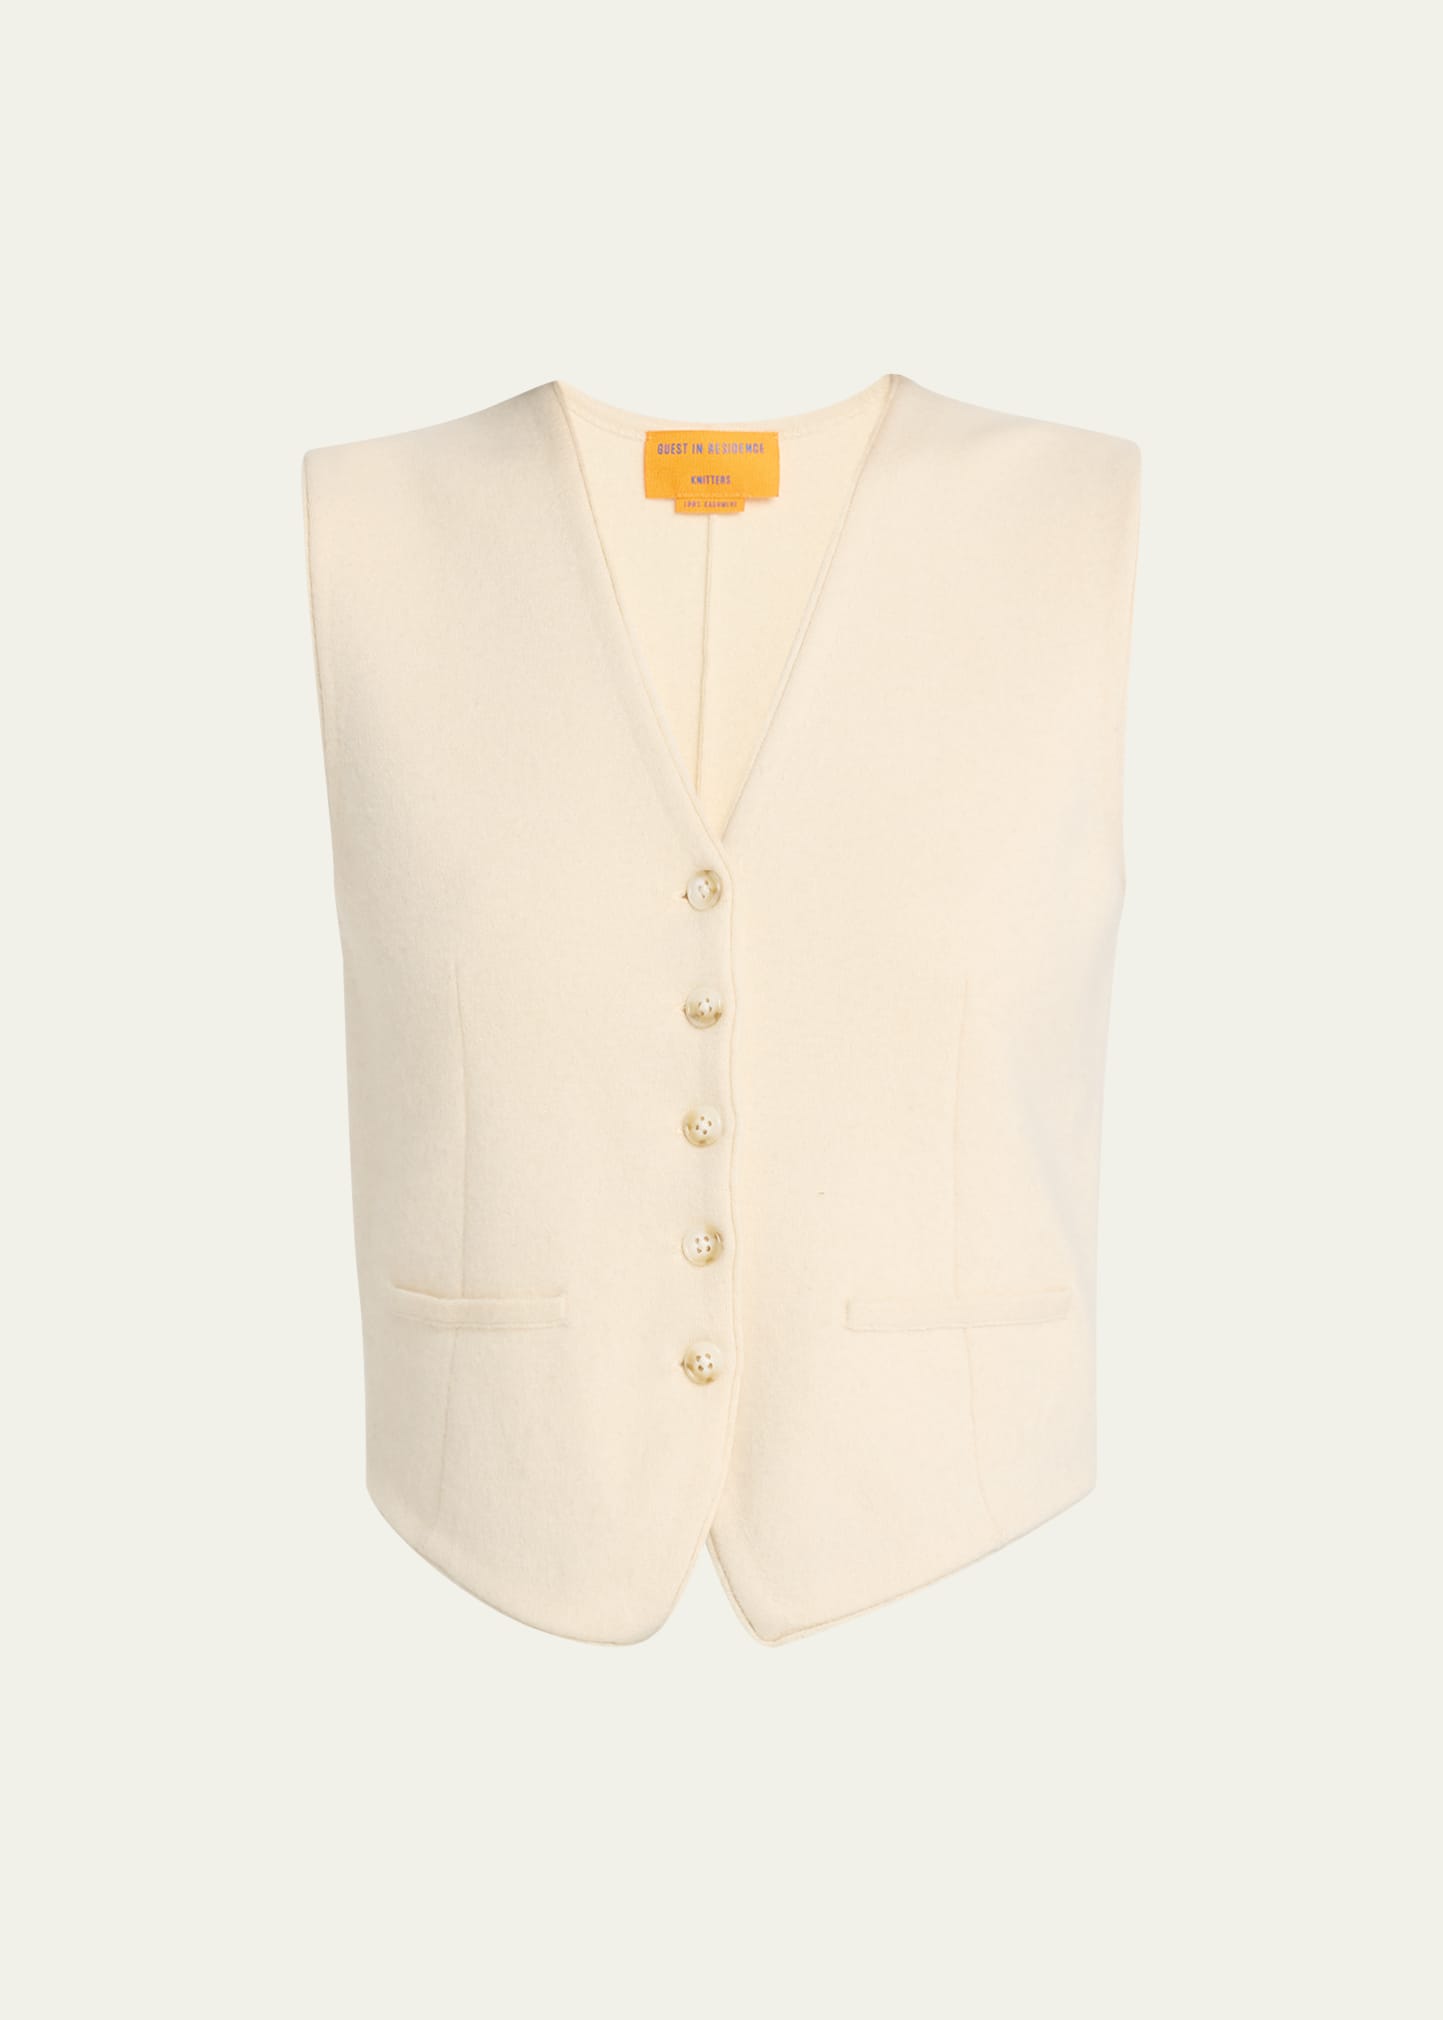 GUEST IN RESIDENCE TAILORED CASHMERE VEST